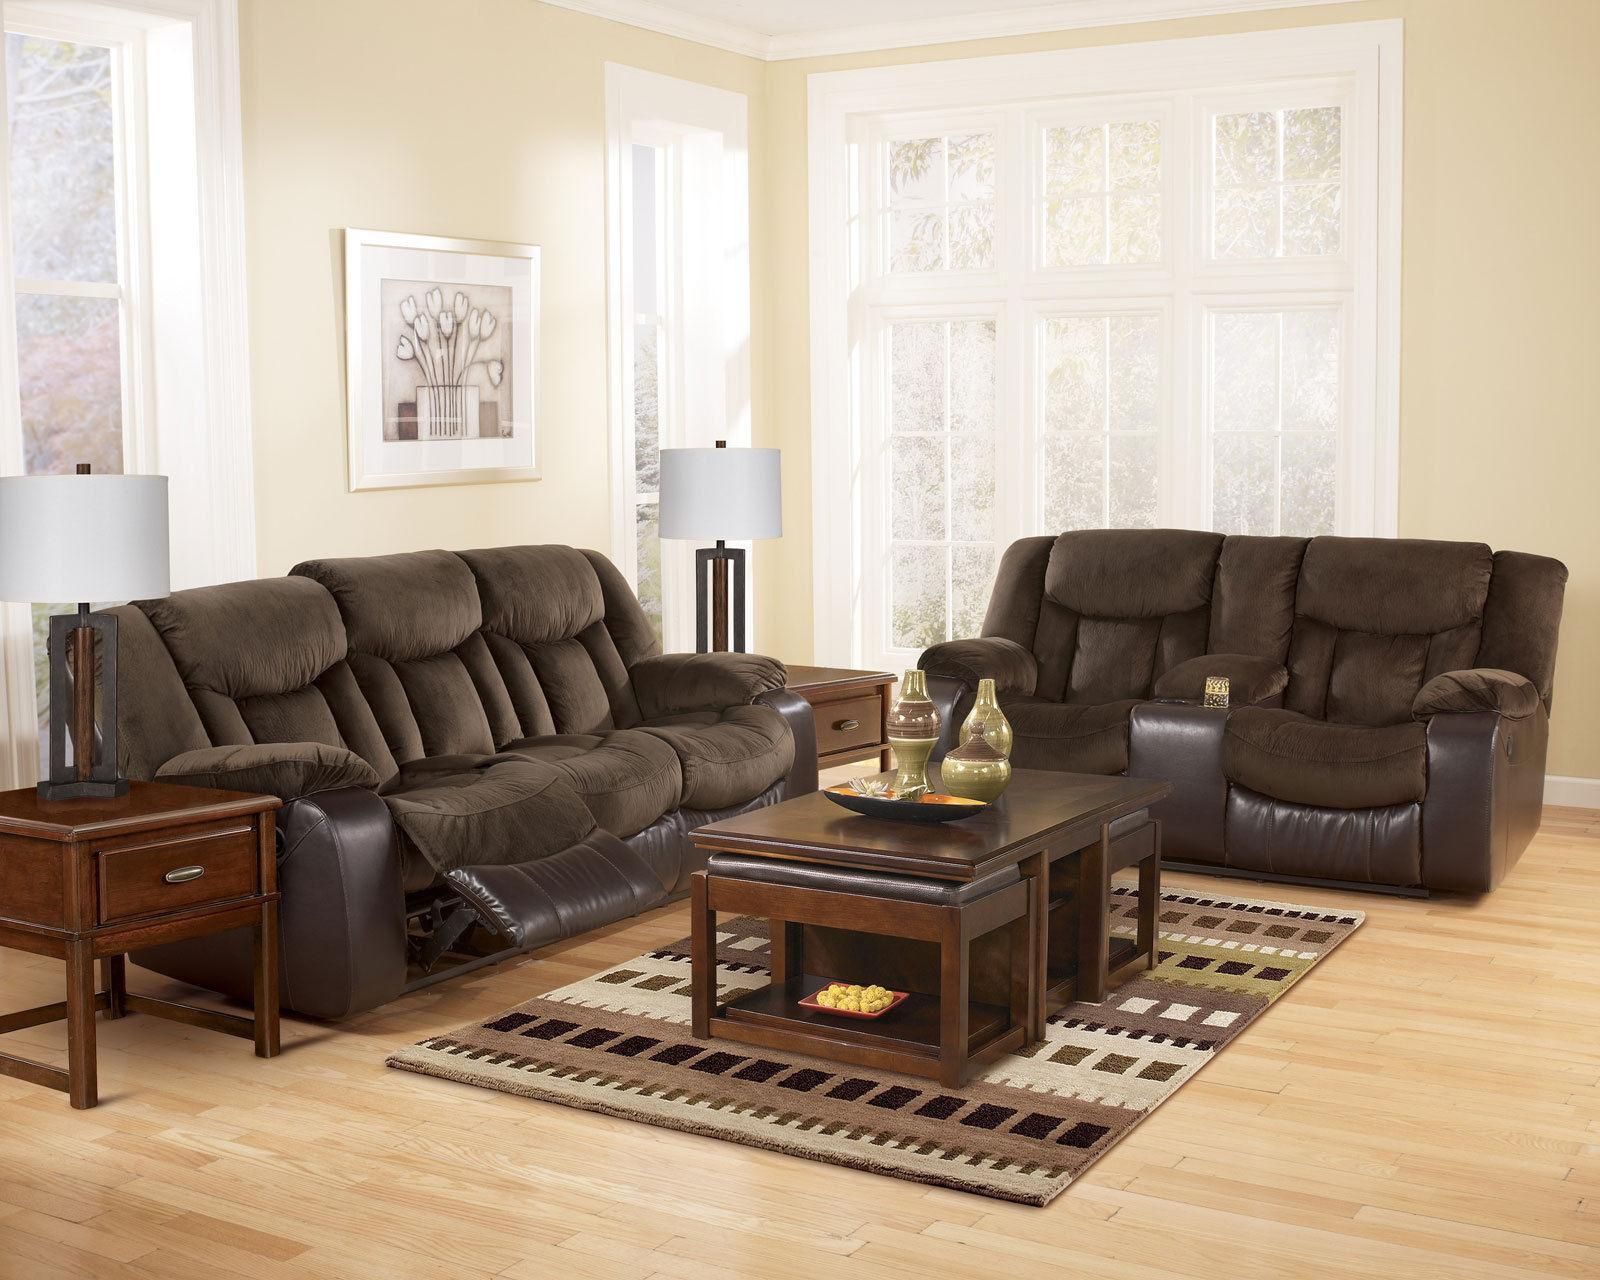 Allegro Living Room Brown Microfiber & Faux Leather Reclining Sofa Inside Faux Leather Sofas In Dark Brown (View 8 of 20)